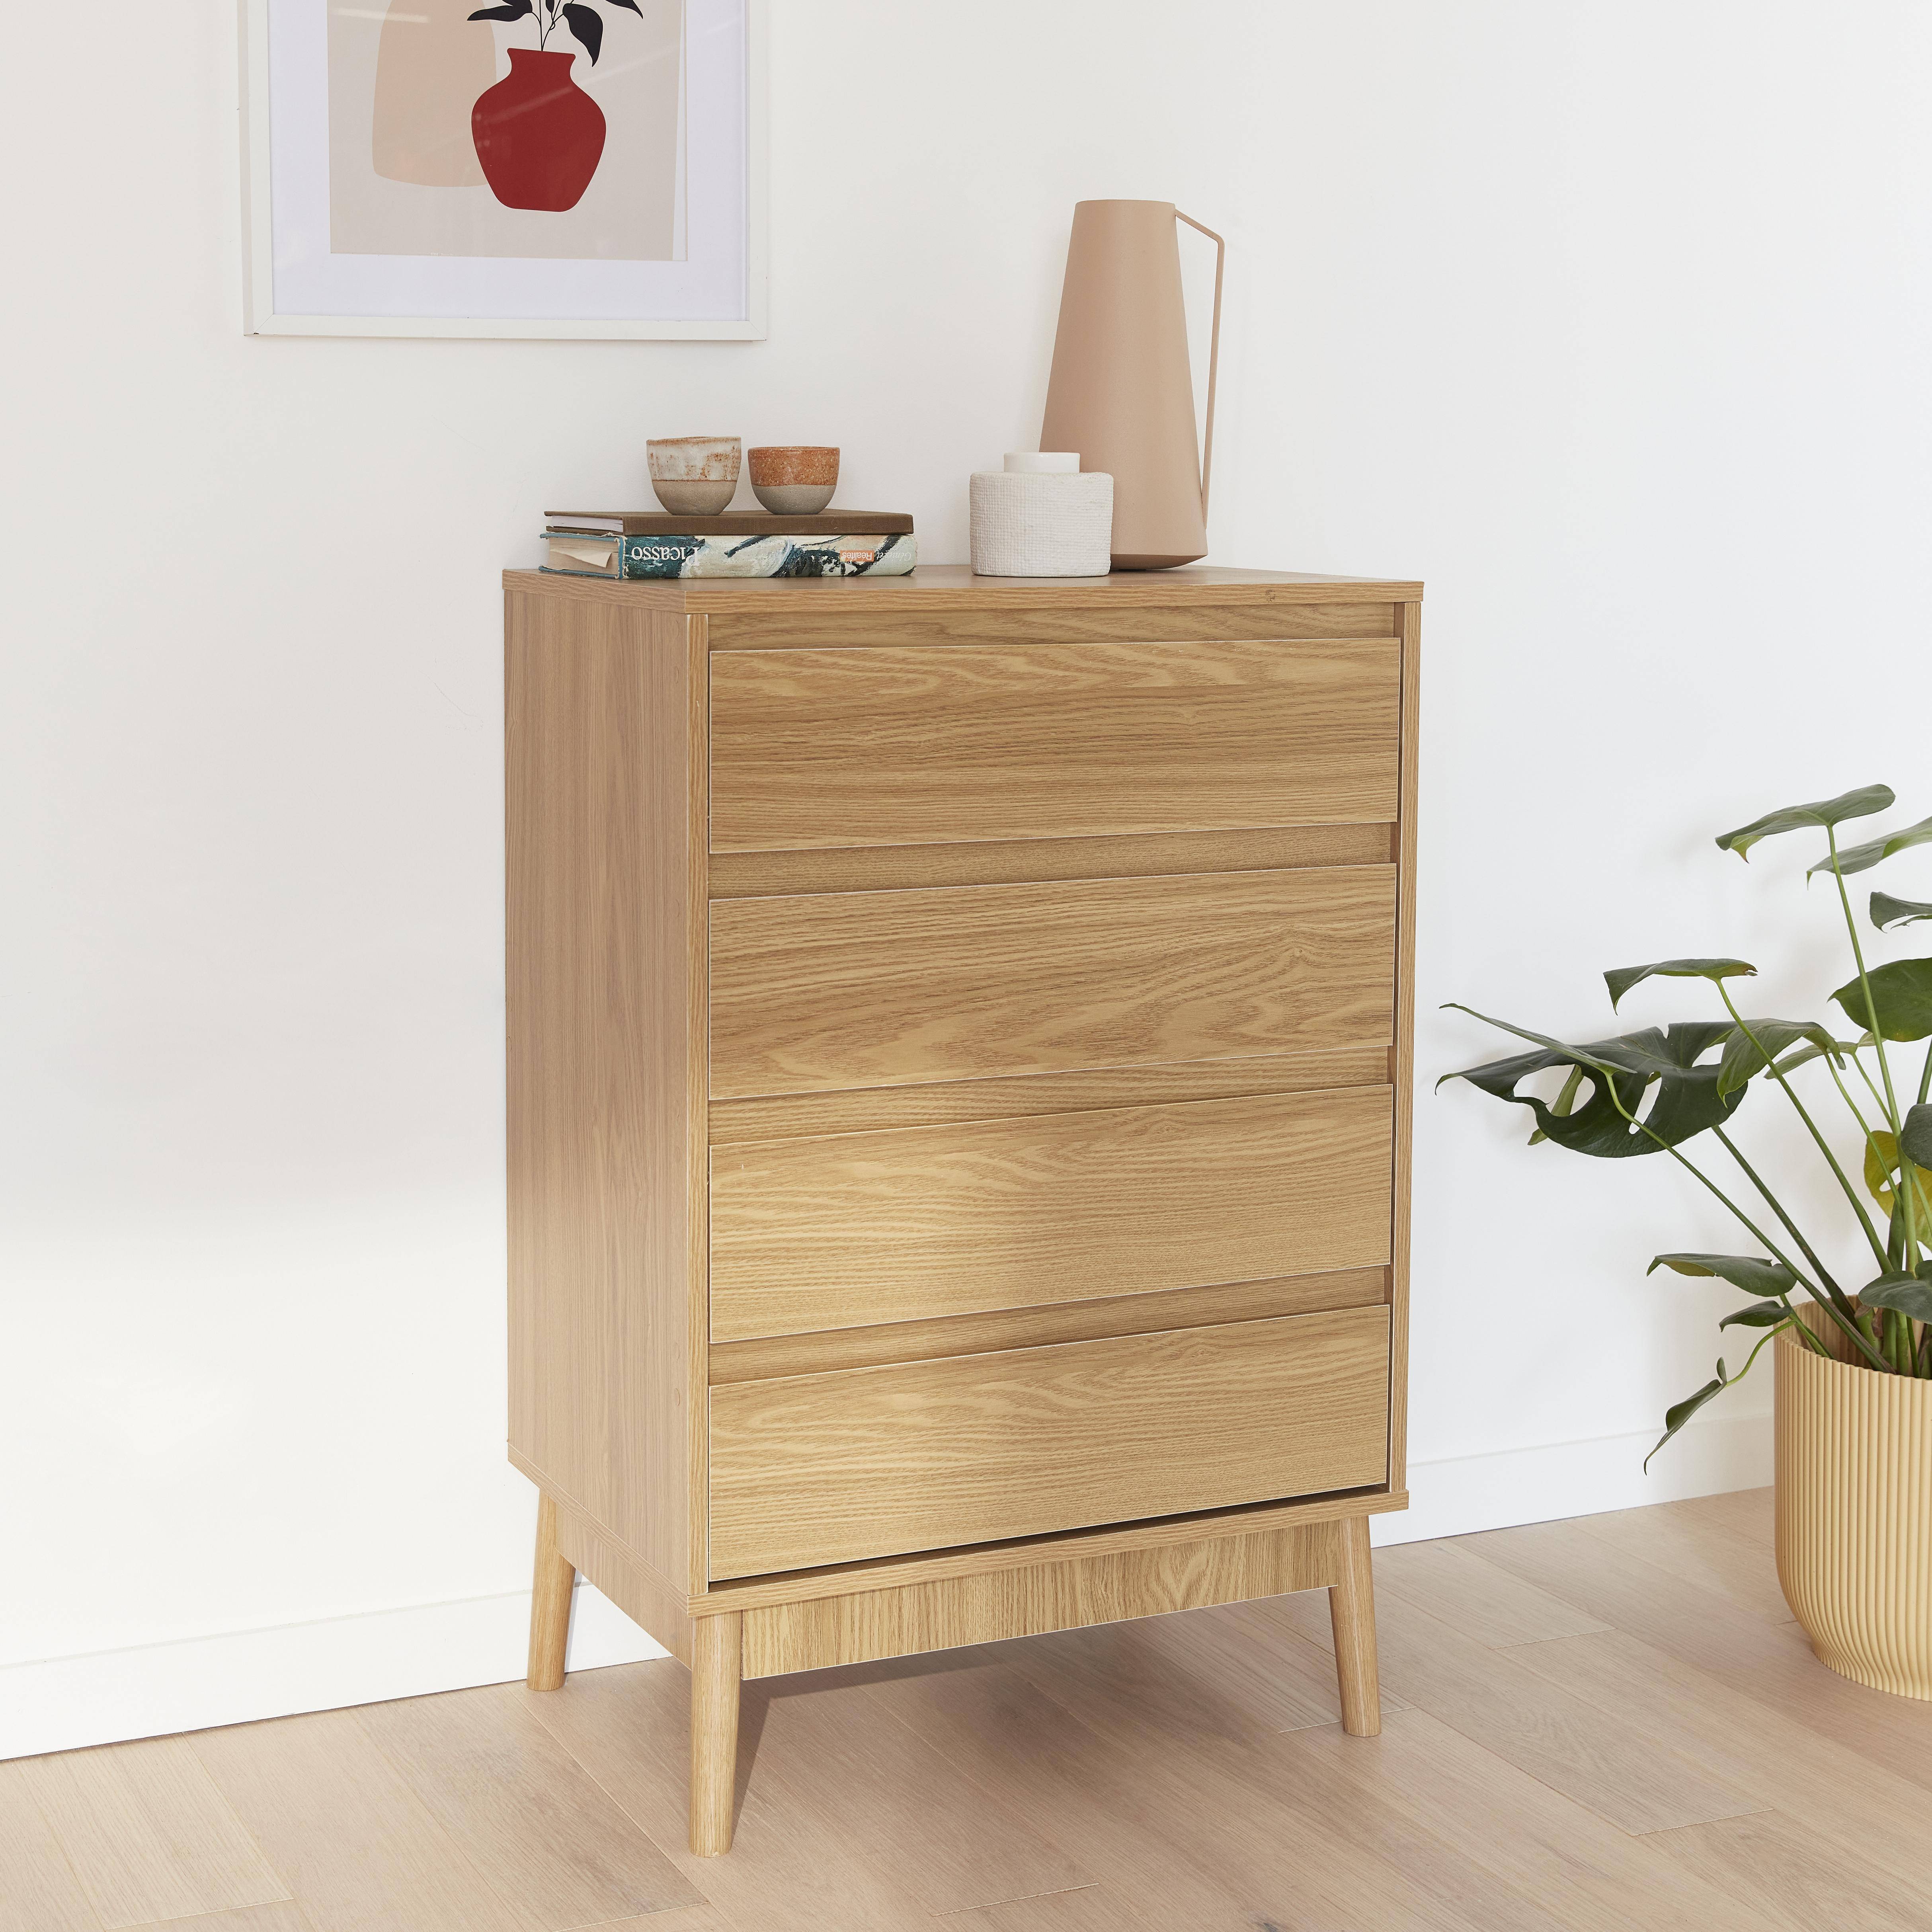 Wooden 4-drawer chest, 60x40x91cm - Dune - Natural wood colour,sweeek,Photo1